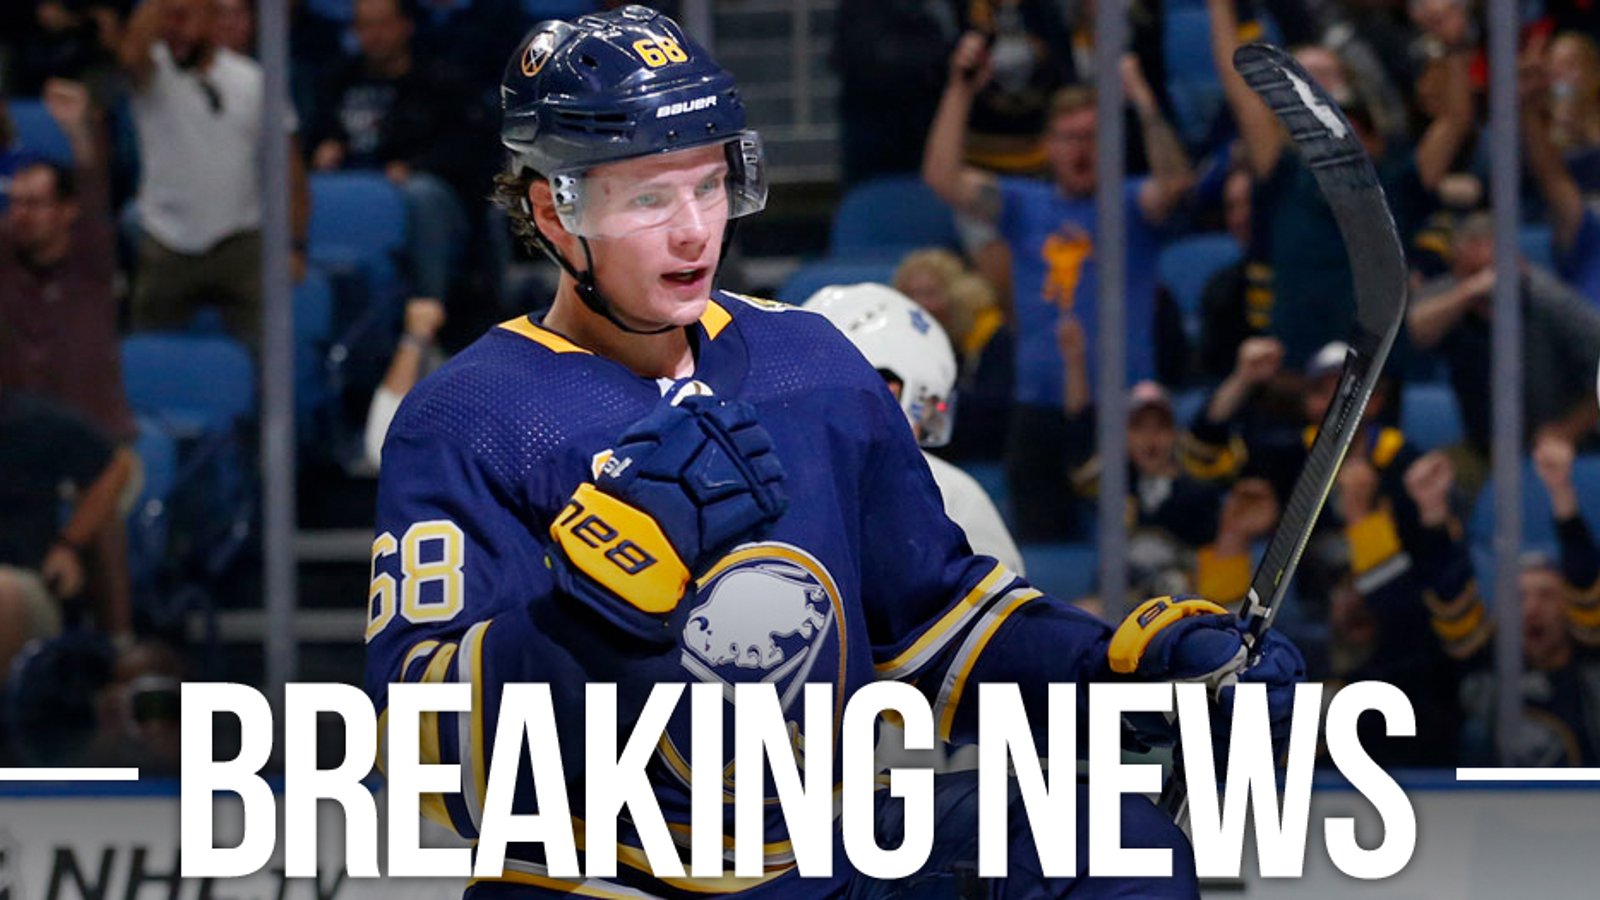 Olofsson signs a $6 million deal with the Sabres